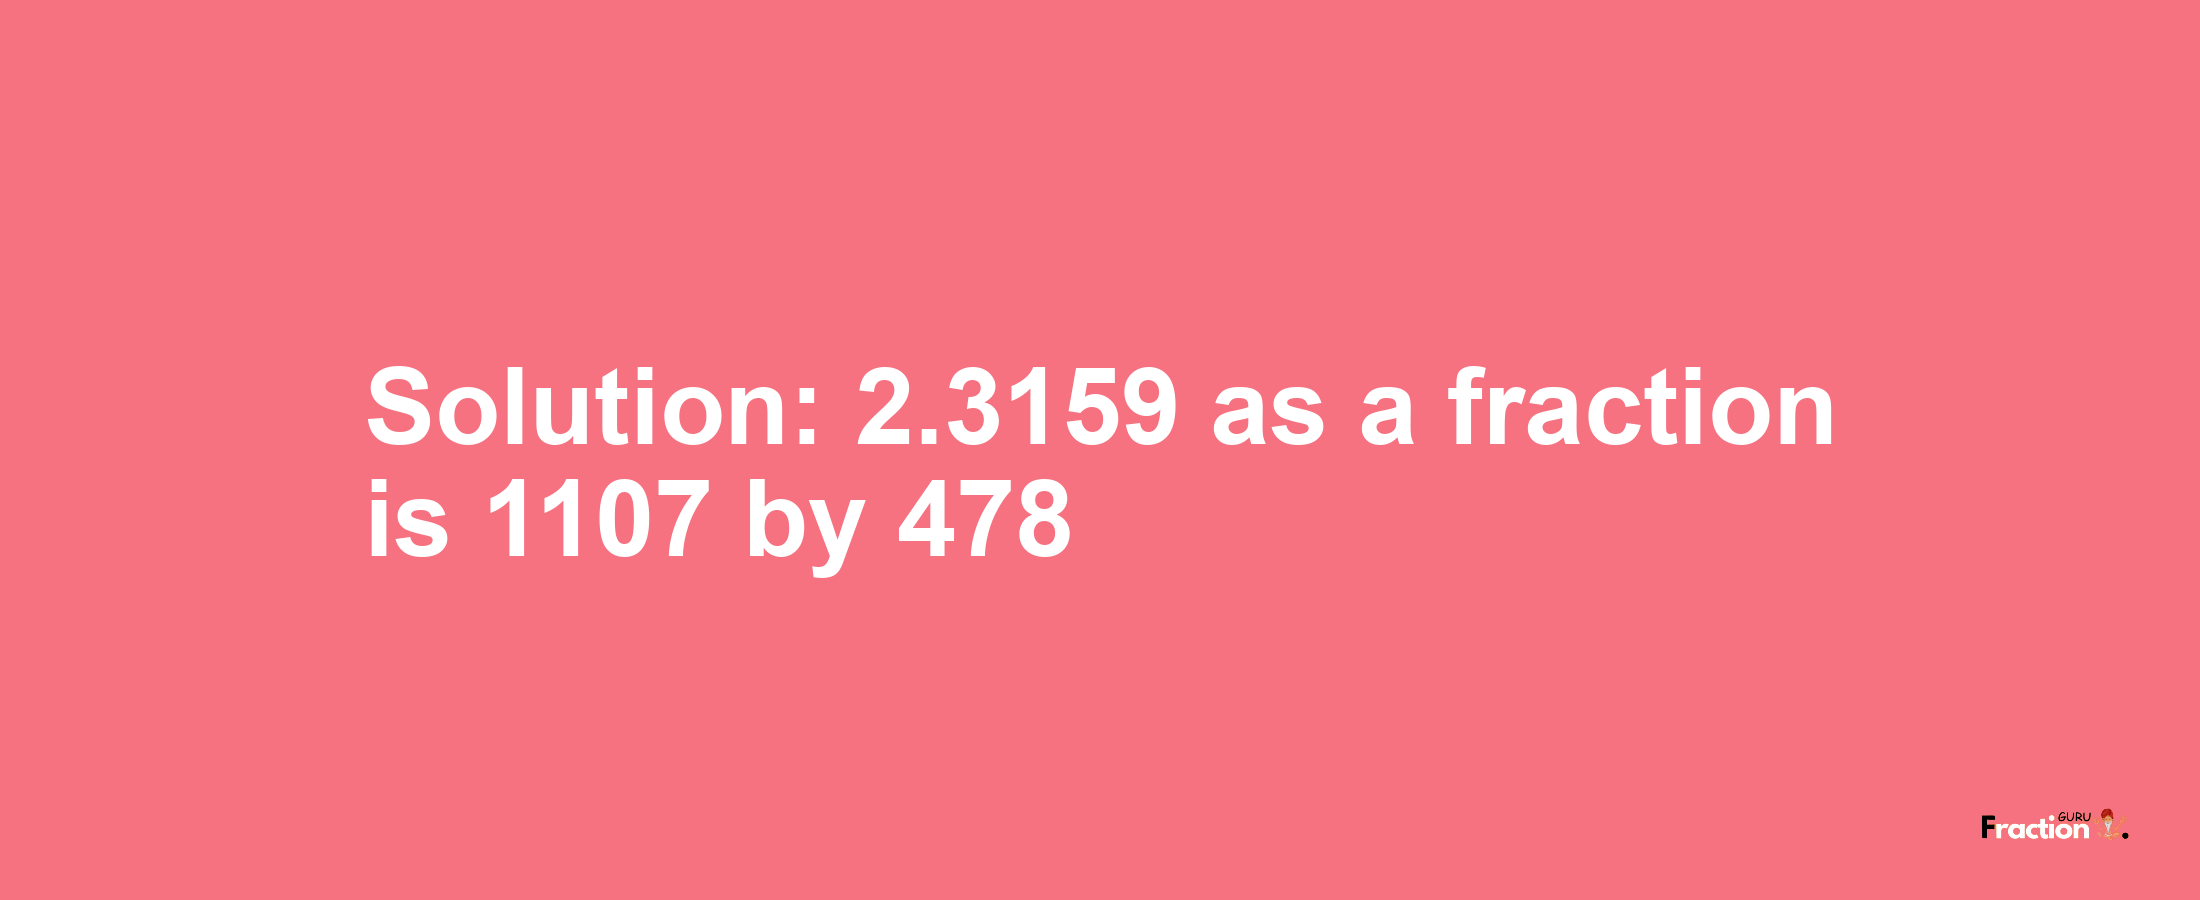 Solution:2.3159 as a fraction is 1107/478